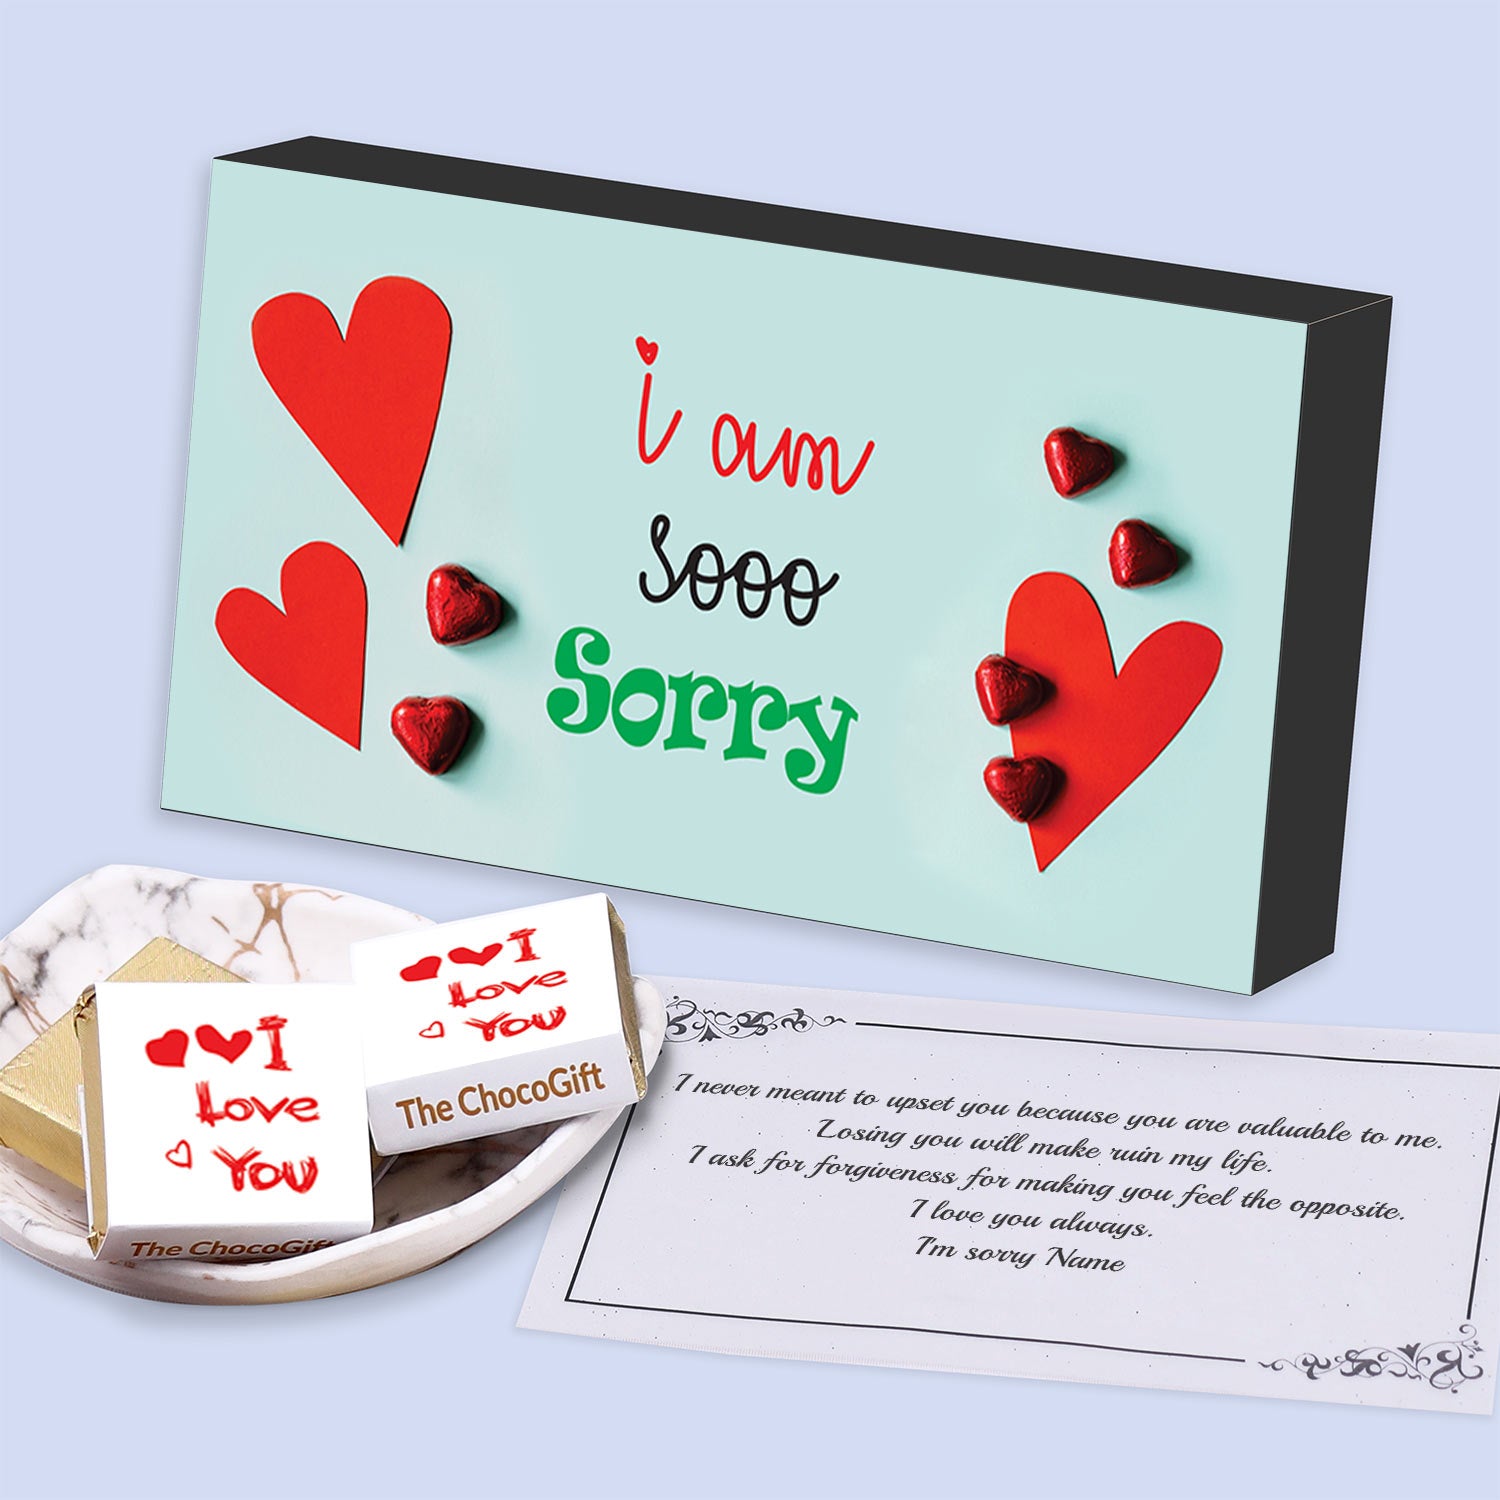 Print Sorry personalised wrappers of chocolate